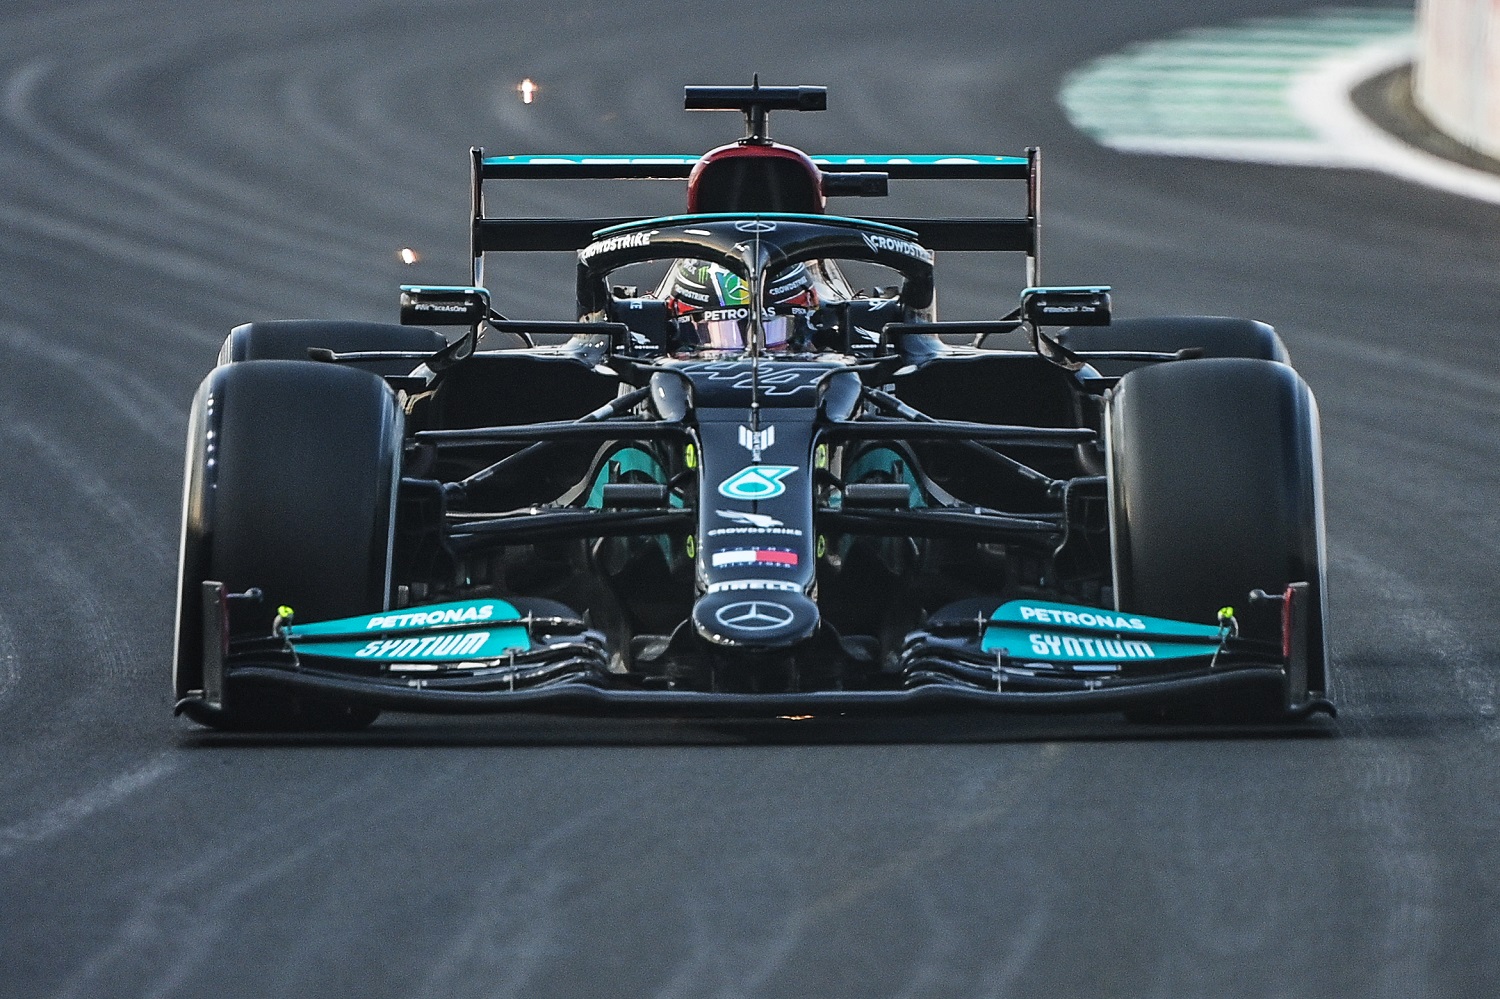 Lewis Hamilton drives during the third practice session of the Formula 1 Saudi Arabian Grand Prix at the Jeddah Corniche Circuit in Jeddah on Dec. 4, 2021.